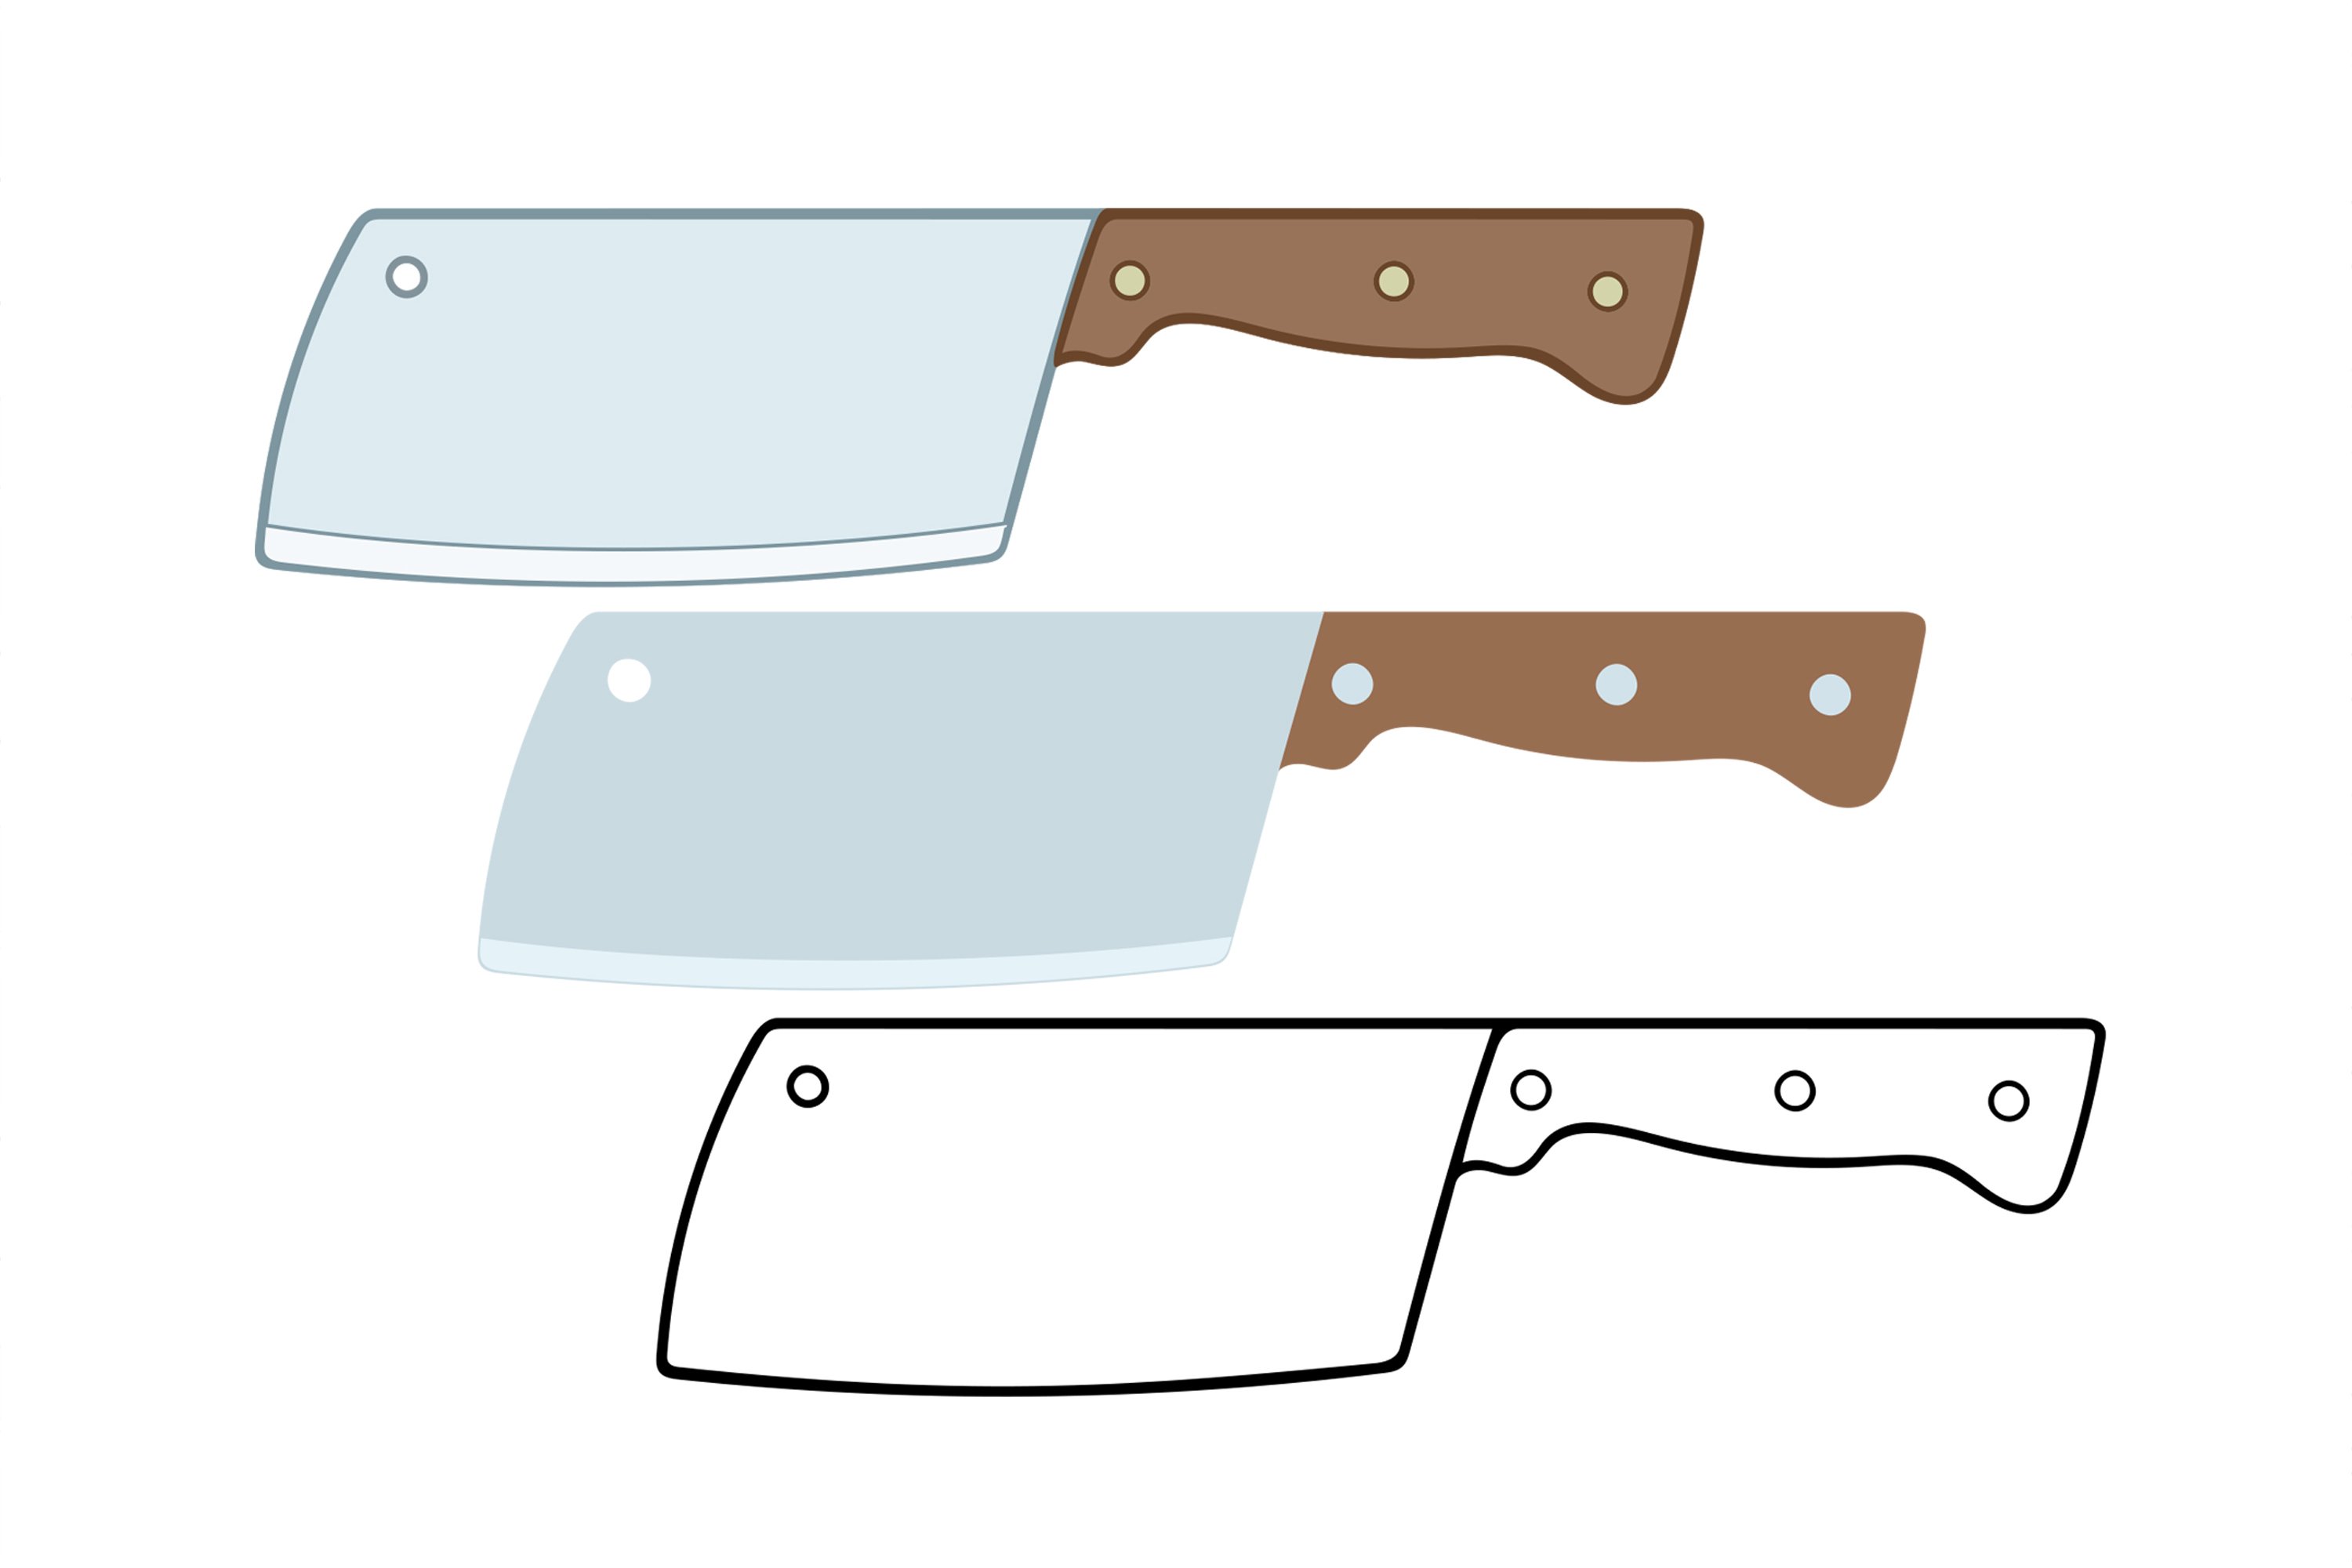 20 types of kitchen knives svg and png db 4 113